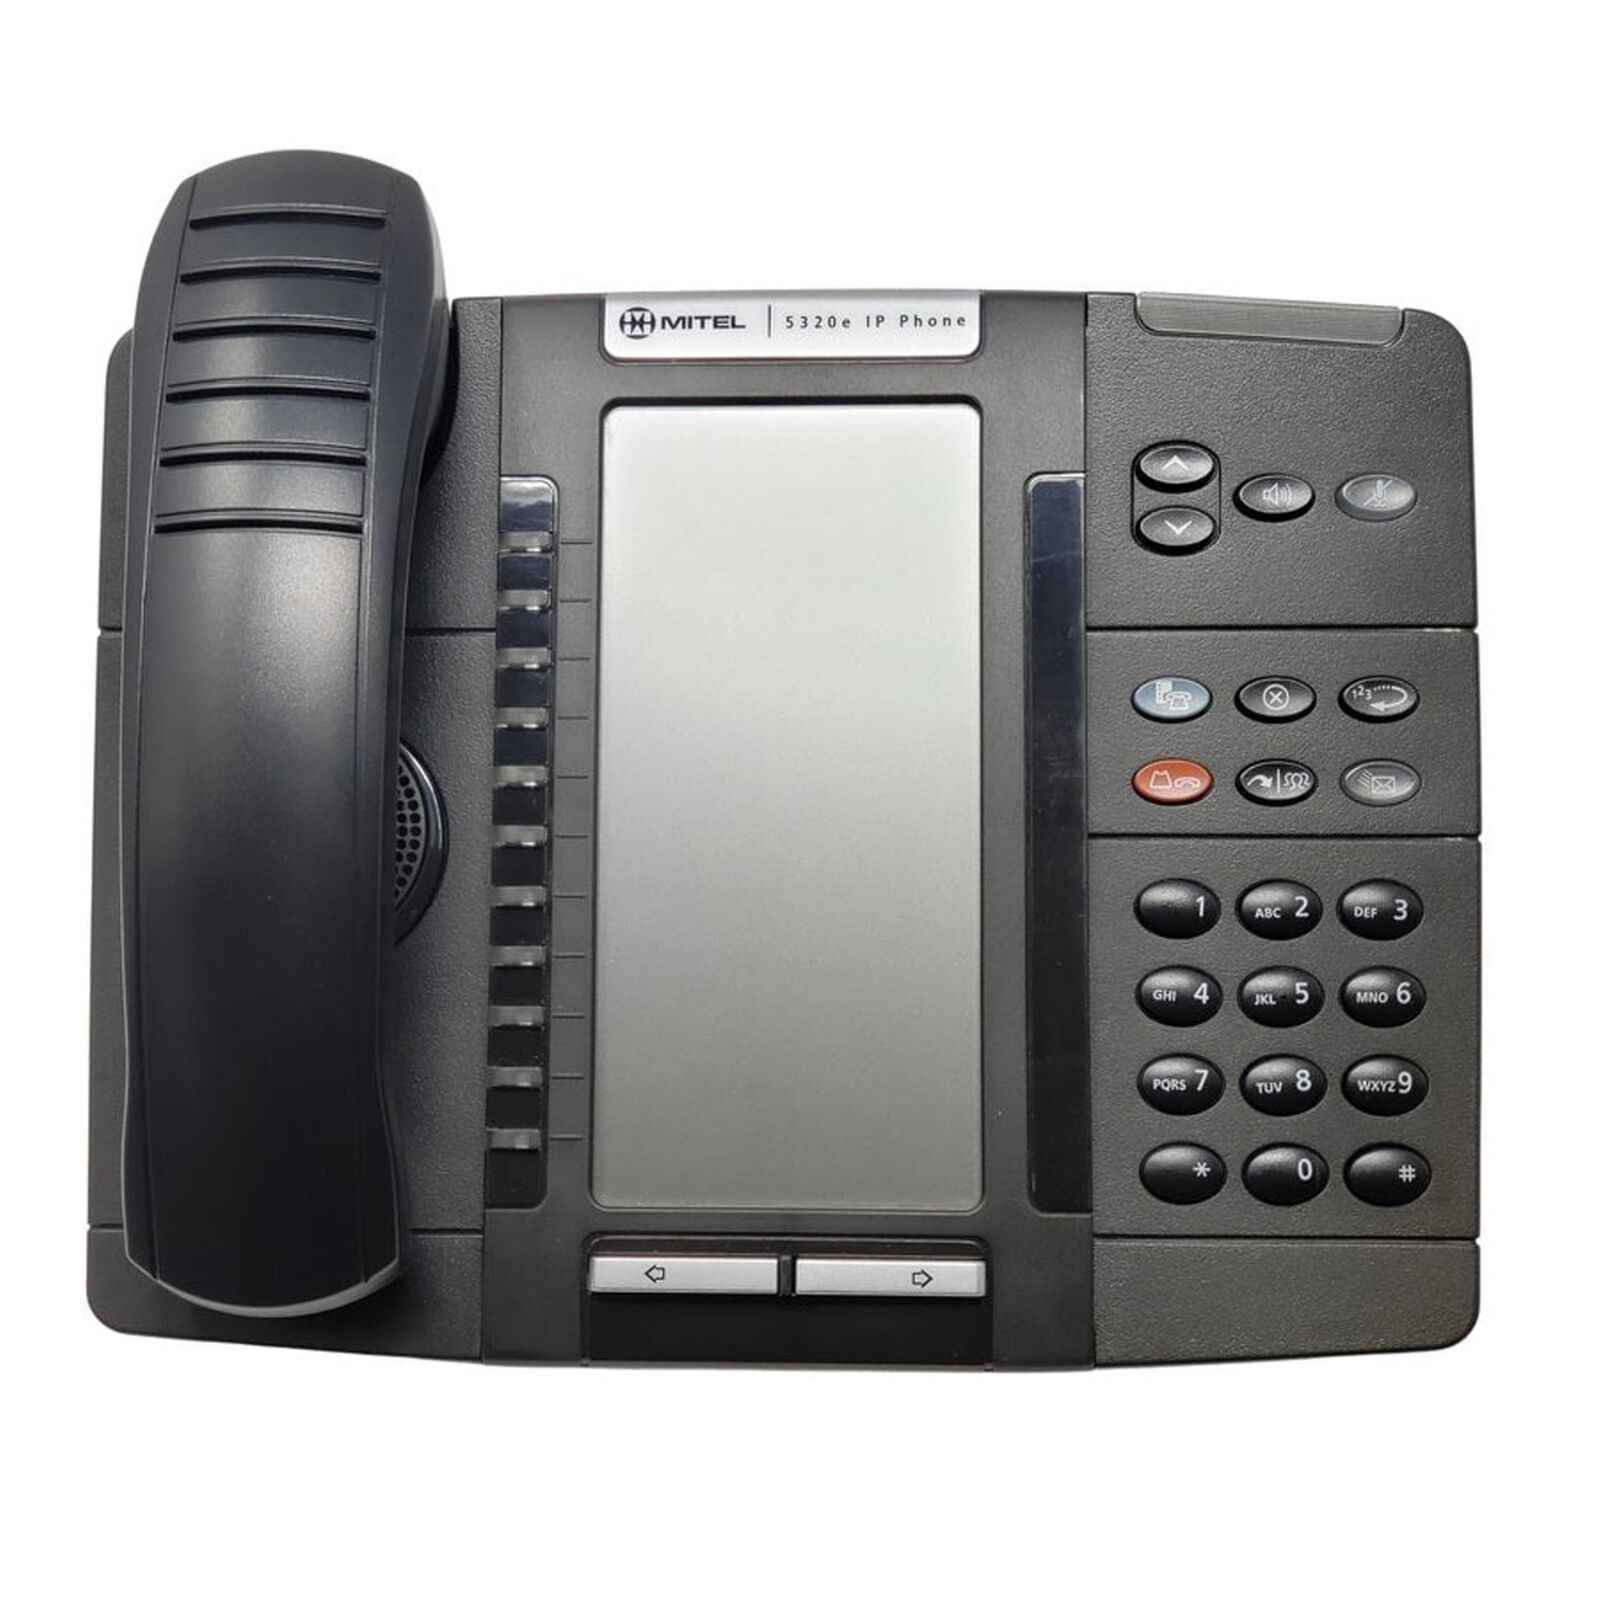 Mitel 5320e IP Phone Poe Business Office A Handset Voip LCD Screen_